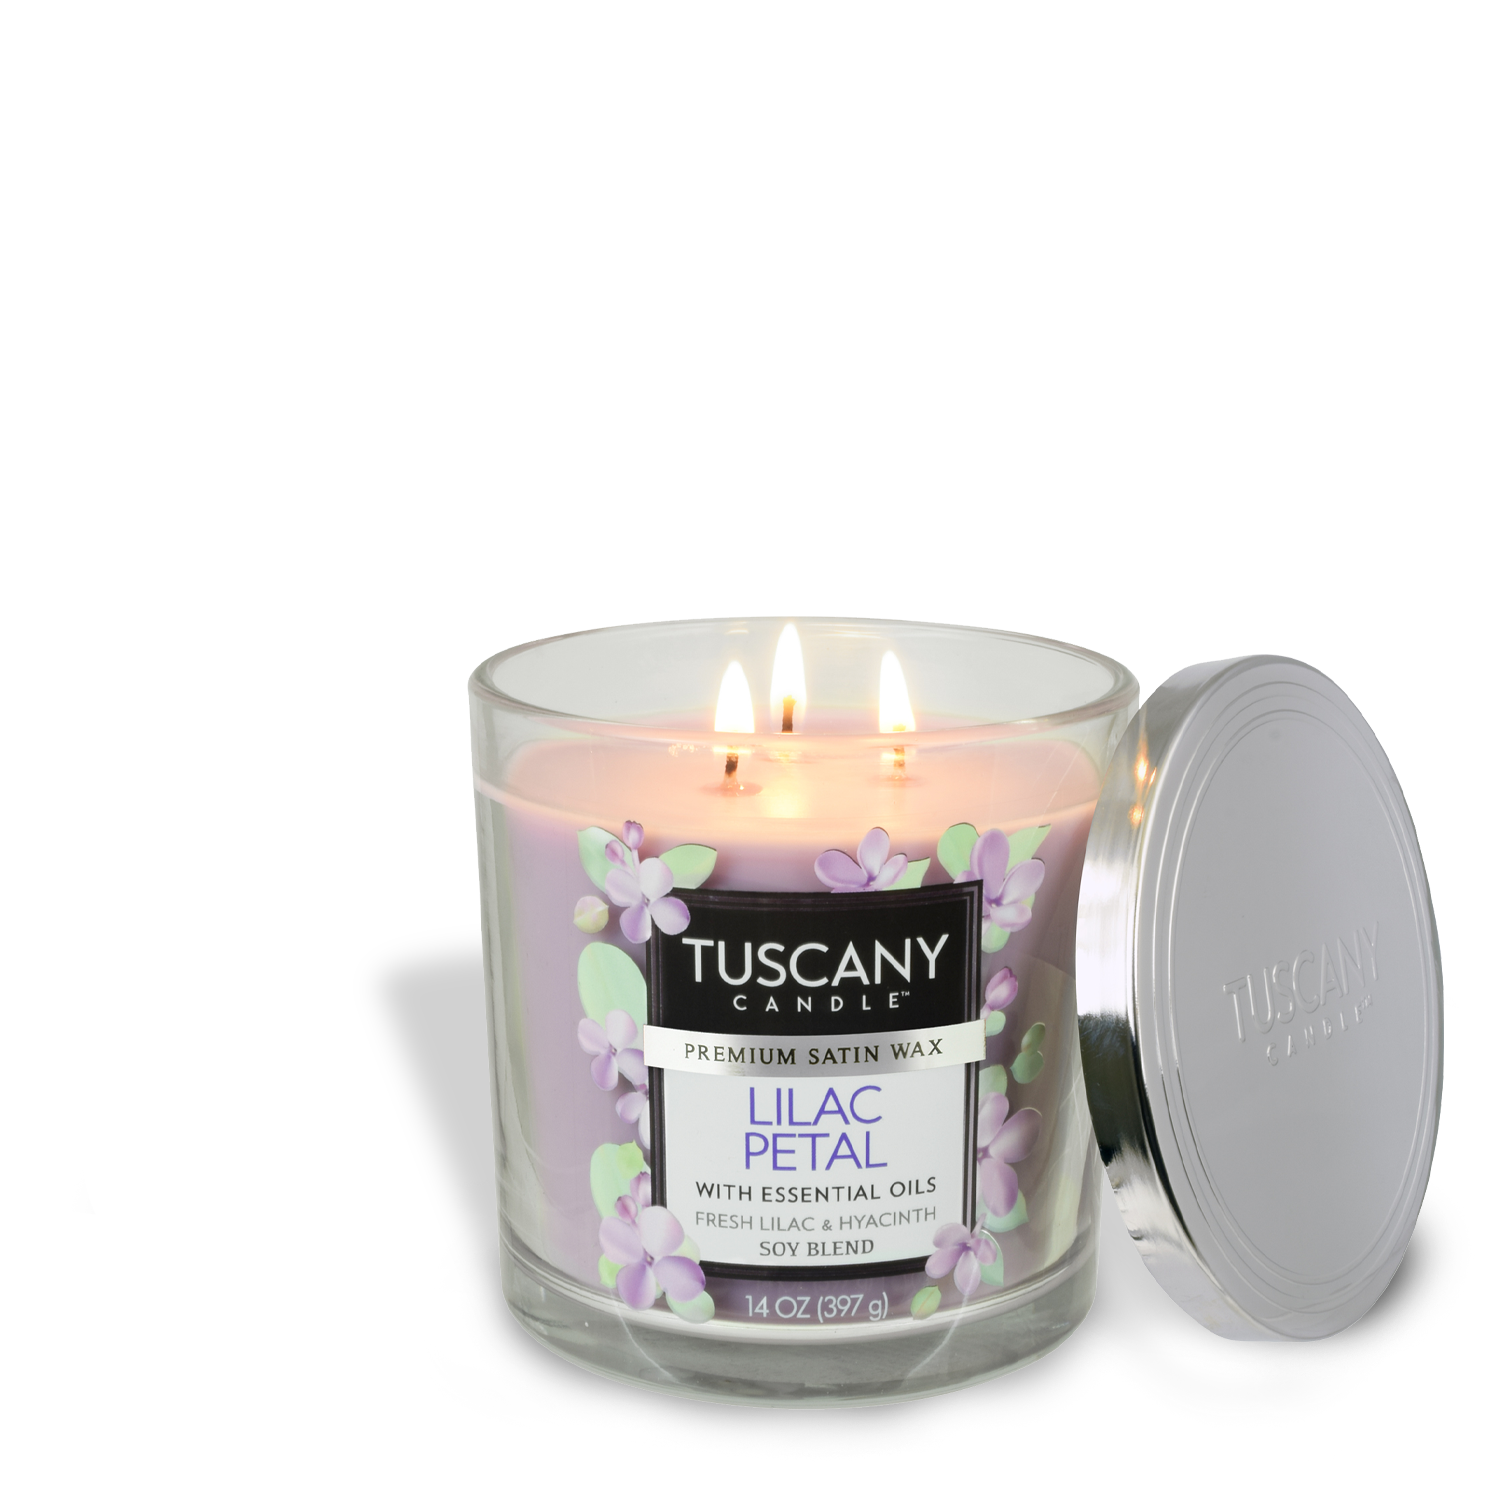 Tuscany Candle Lilac Petal Long-Lasting Scented Jar Candle (14 oz).